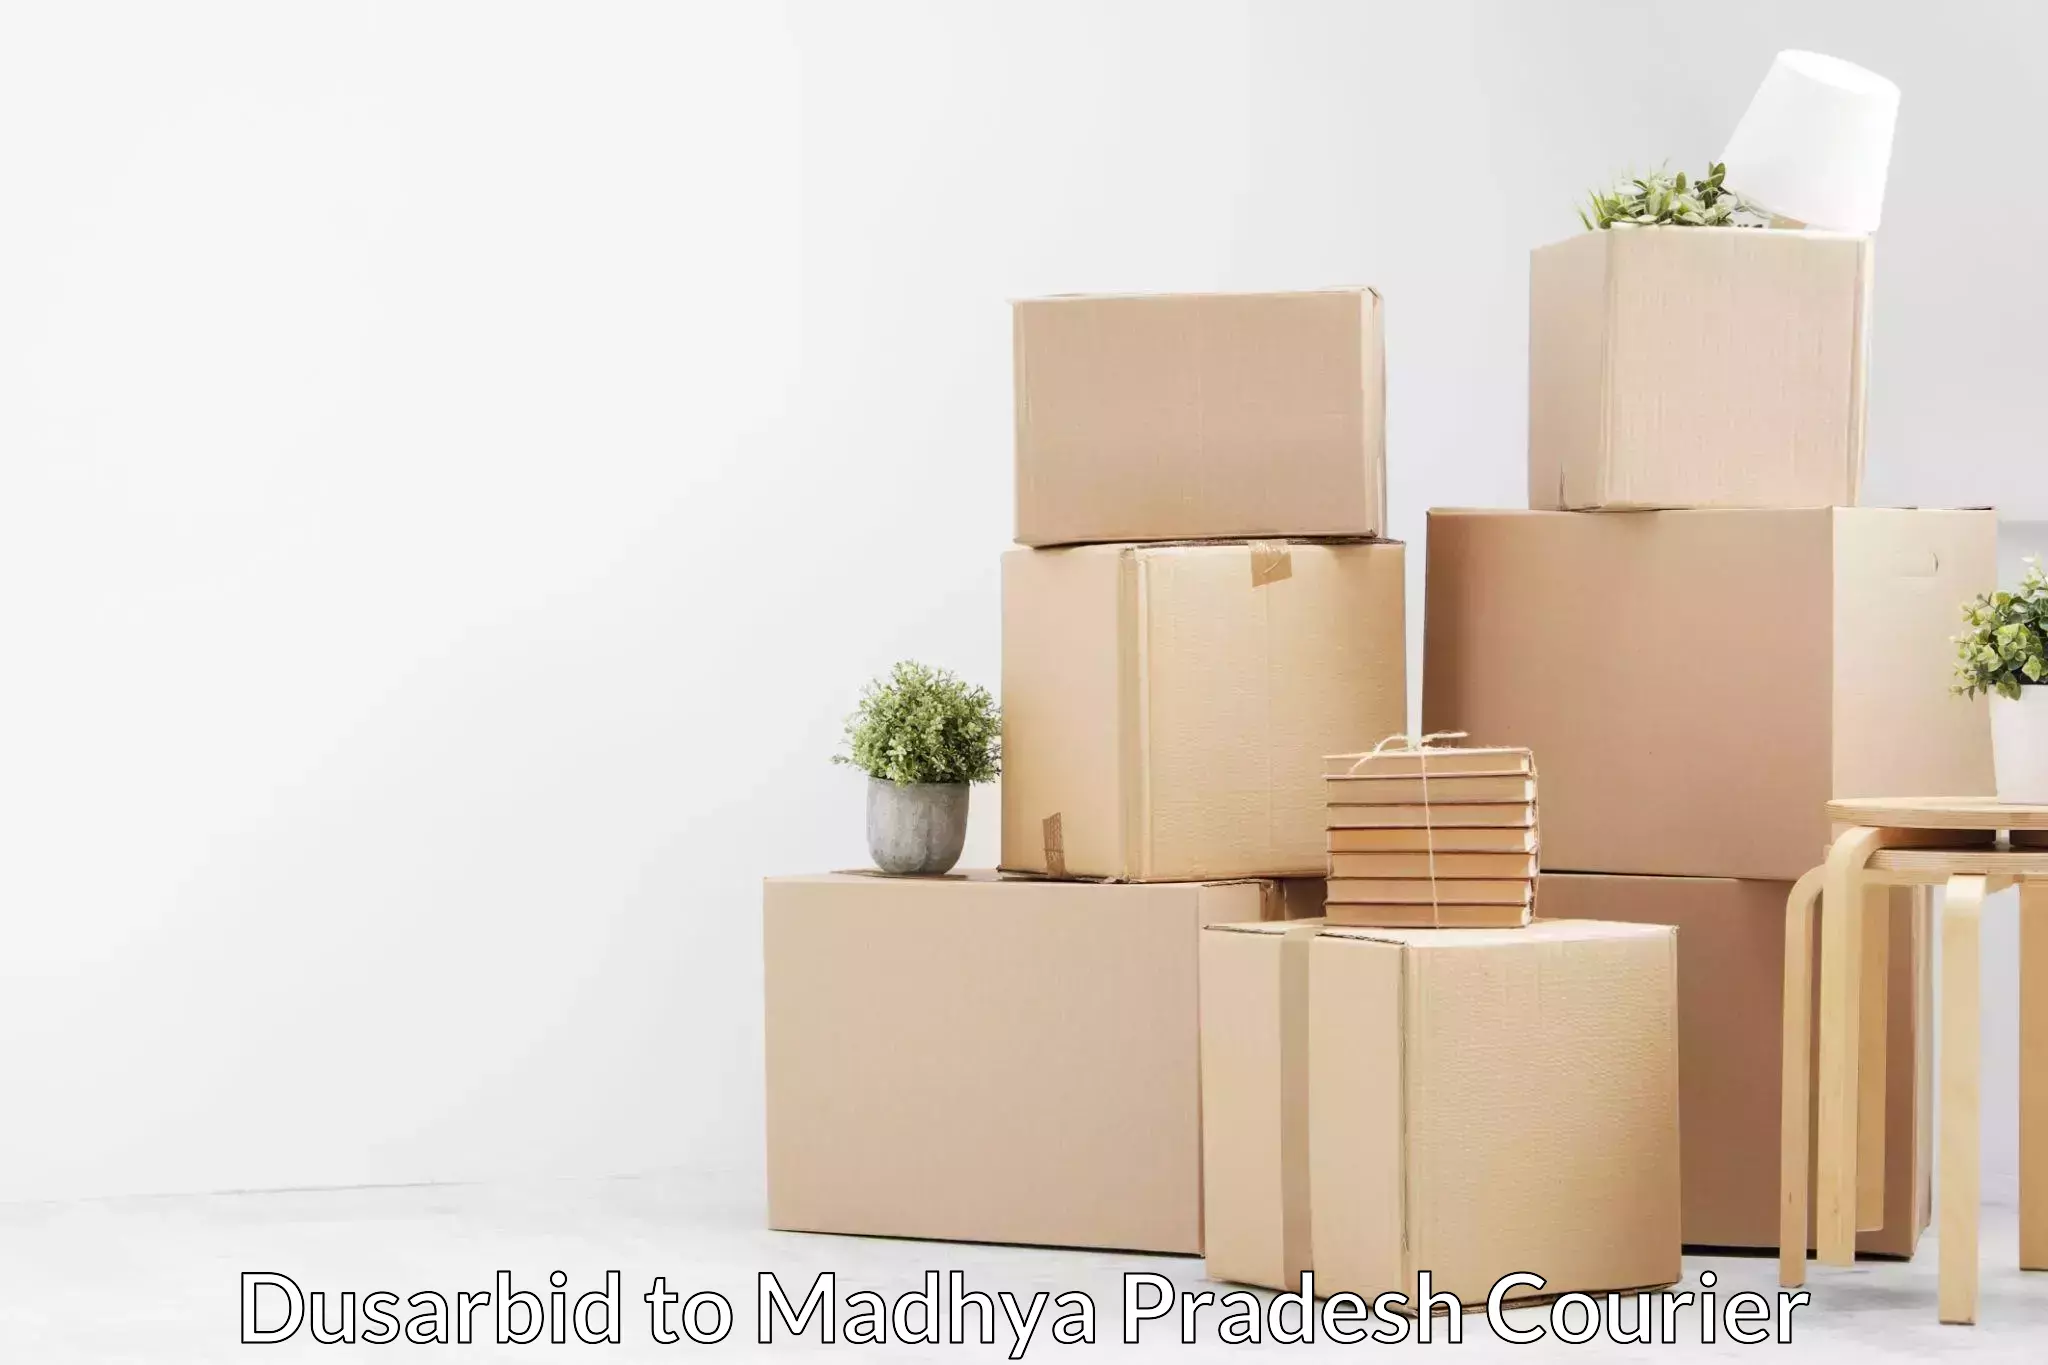 Quality moving and storage in Dusarbid to Rewa